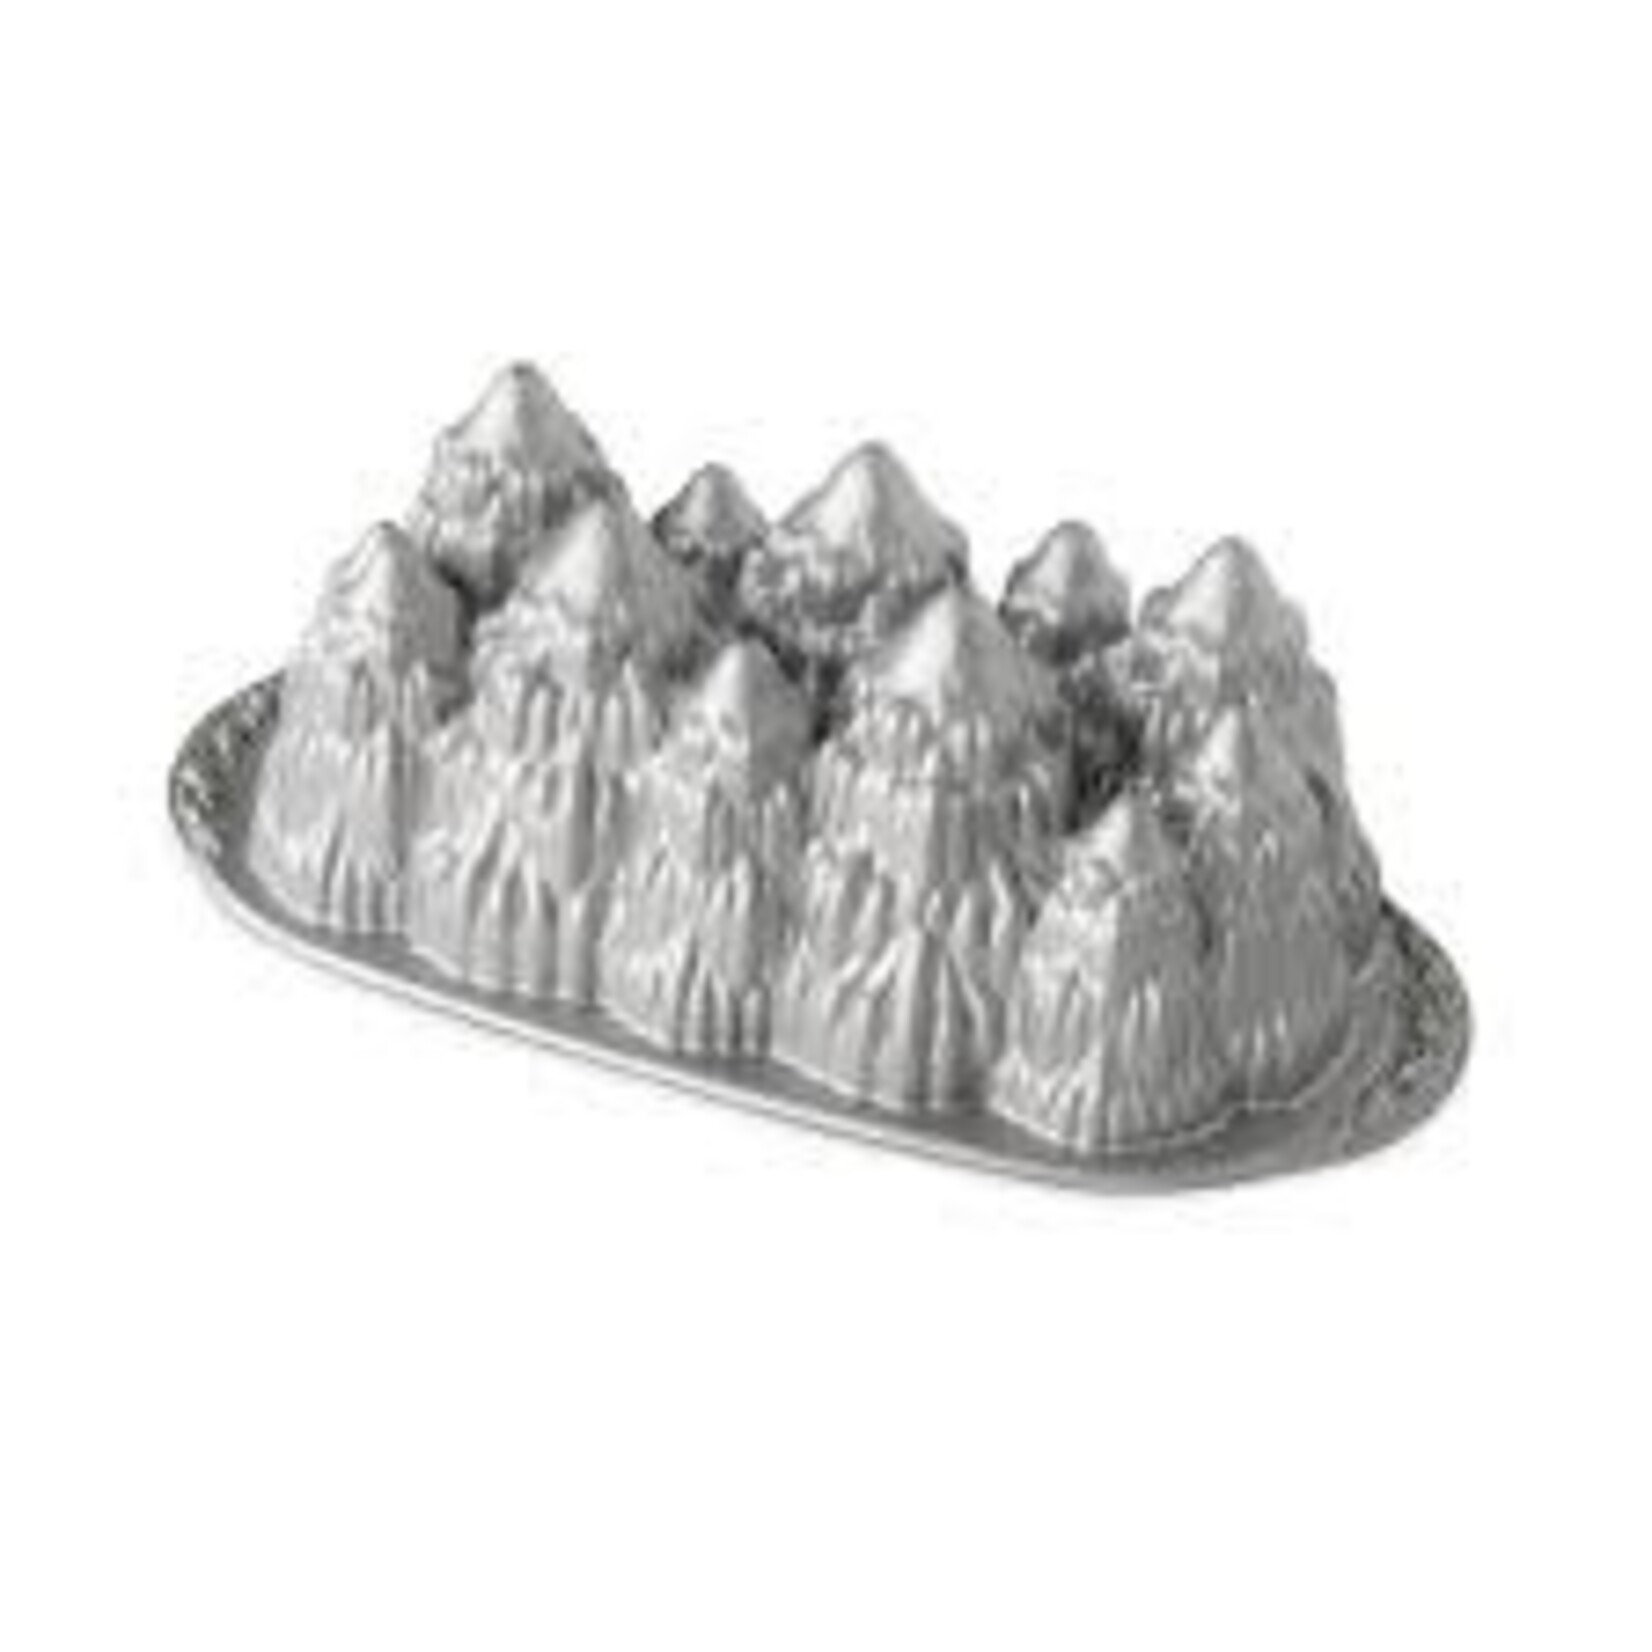 Nordic Ware Nordic Ware Alpine Forest Loaf Nordic Ware Silver Alpine Forest Loaf Nordic Ware 96748